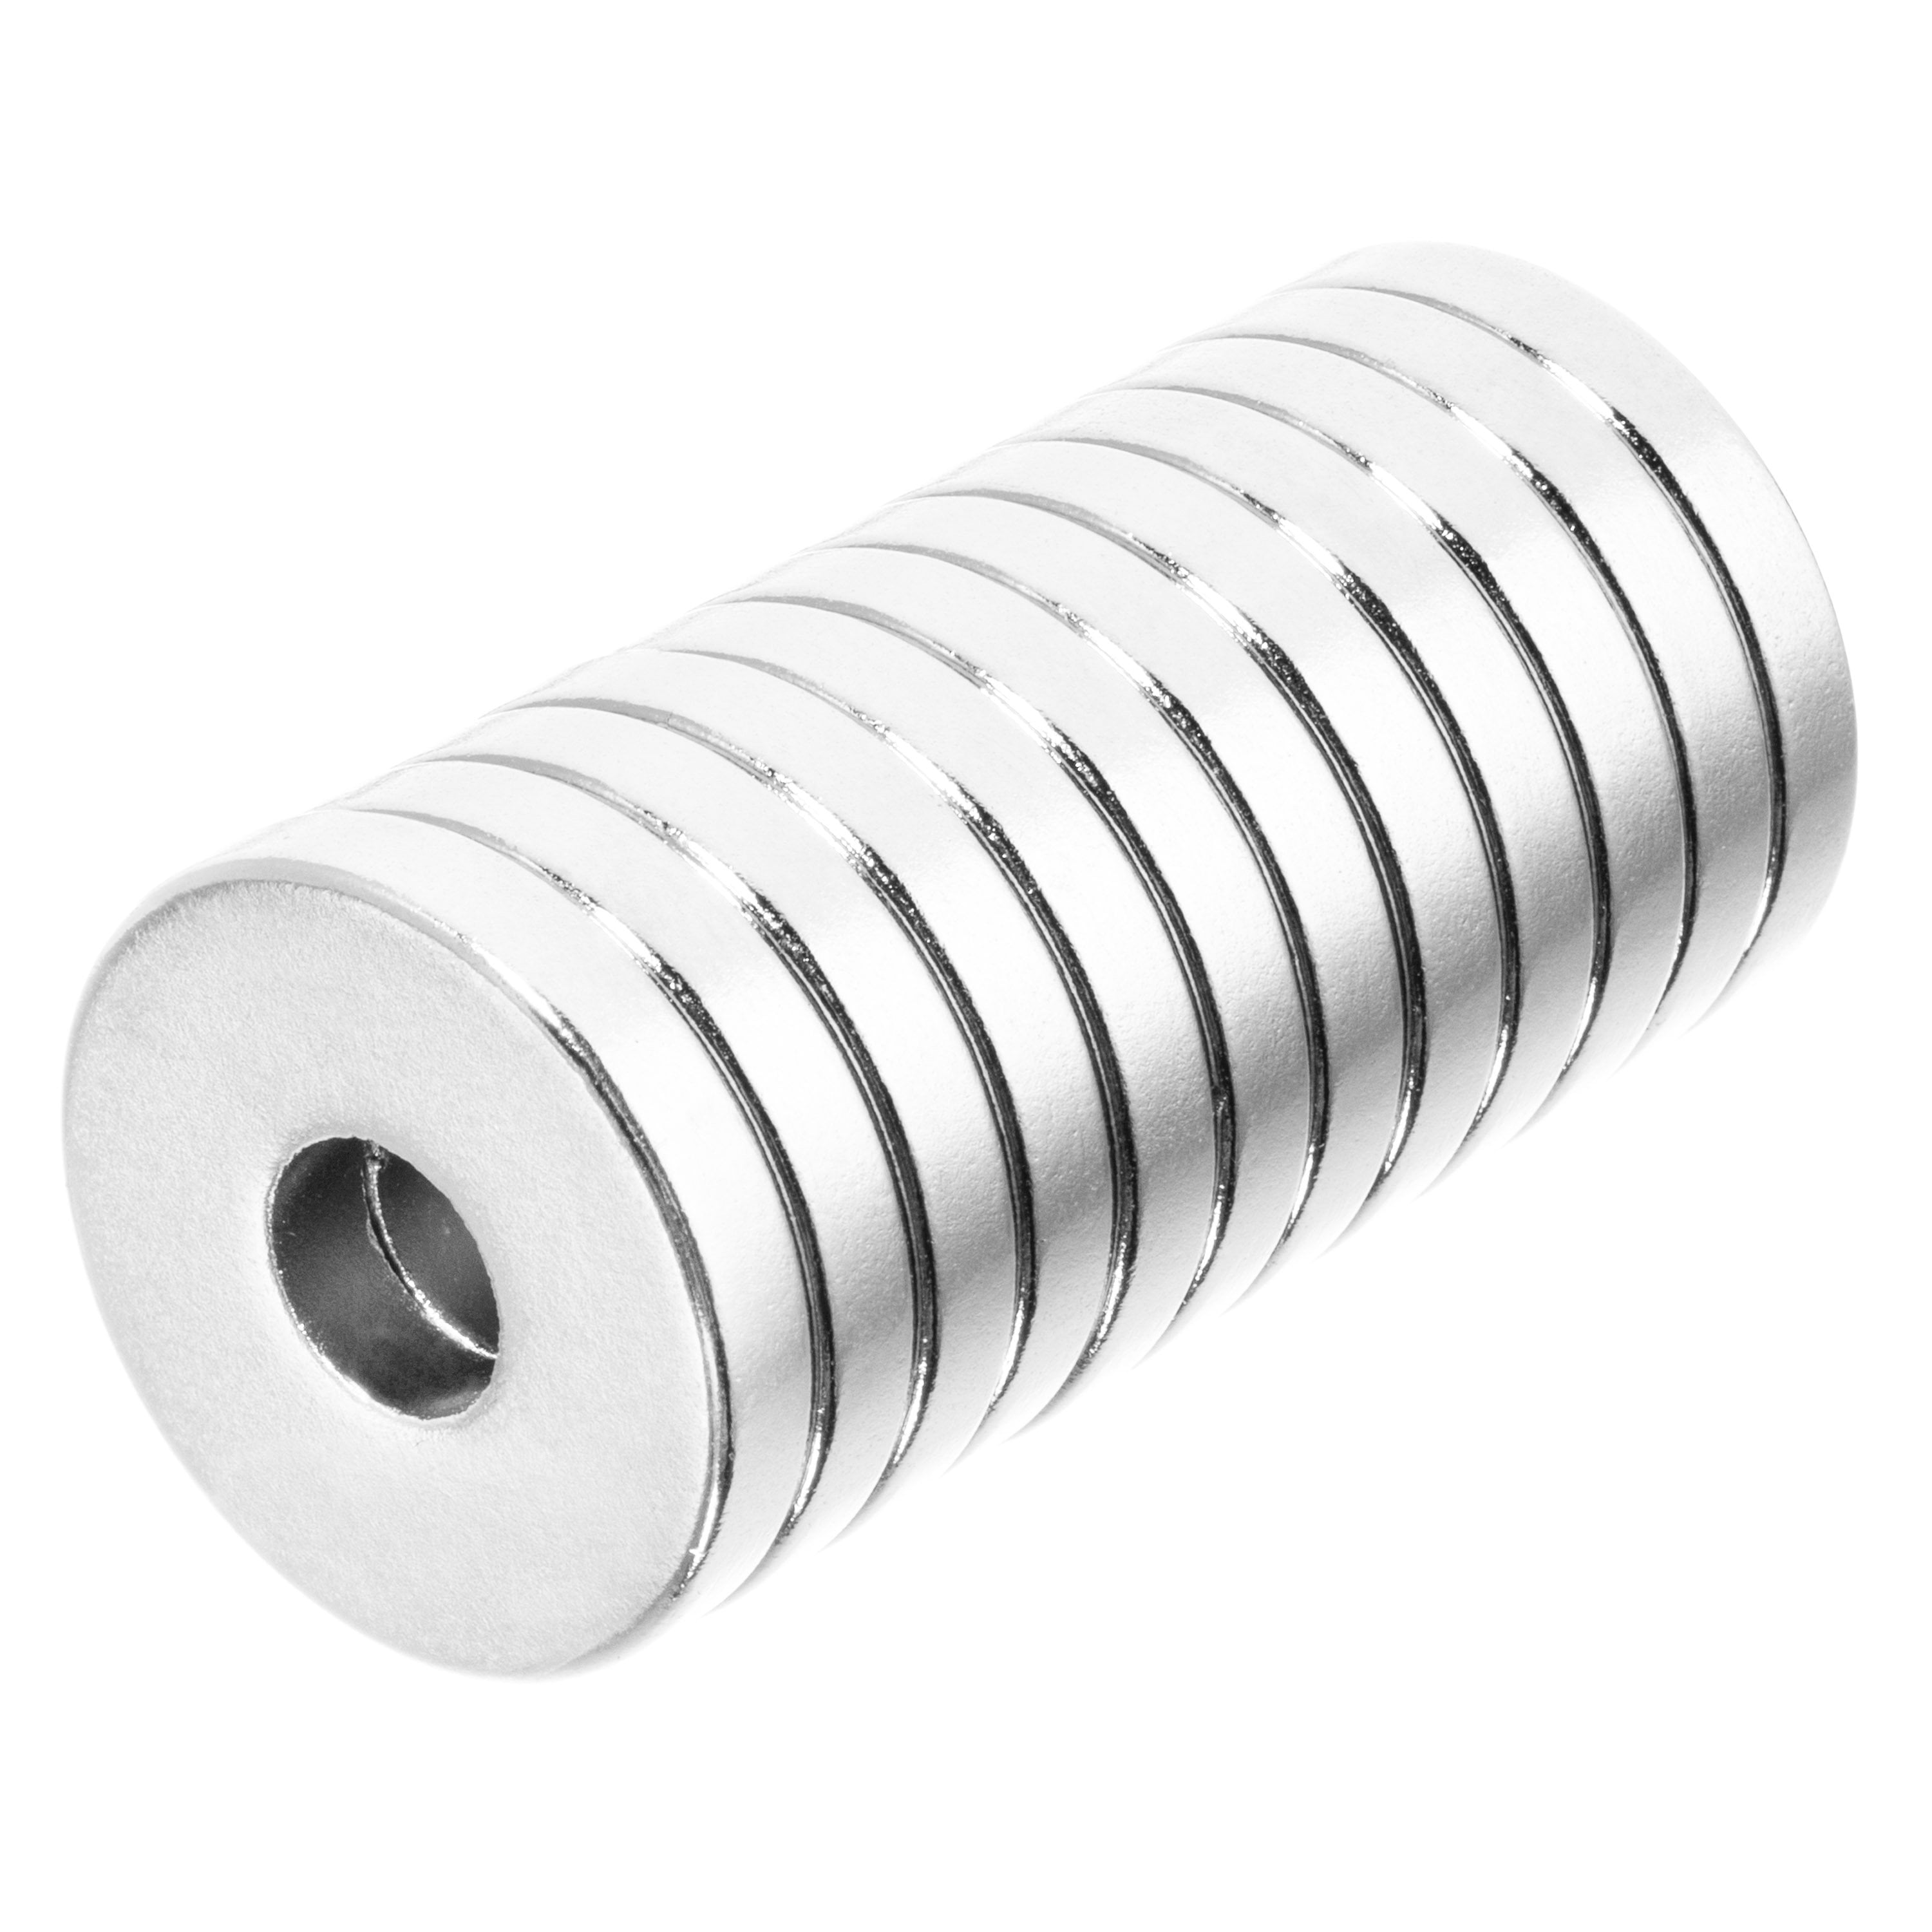 3/4 x 1/8 Inch Neodymium Rare Earth Countersunk Ring Magnets N48 10 Pack 